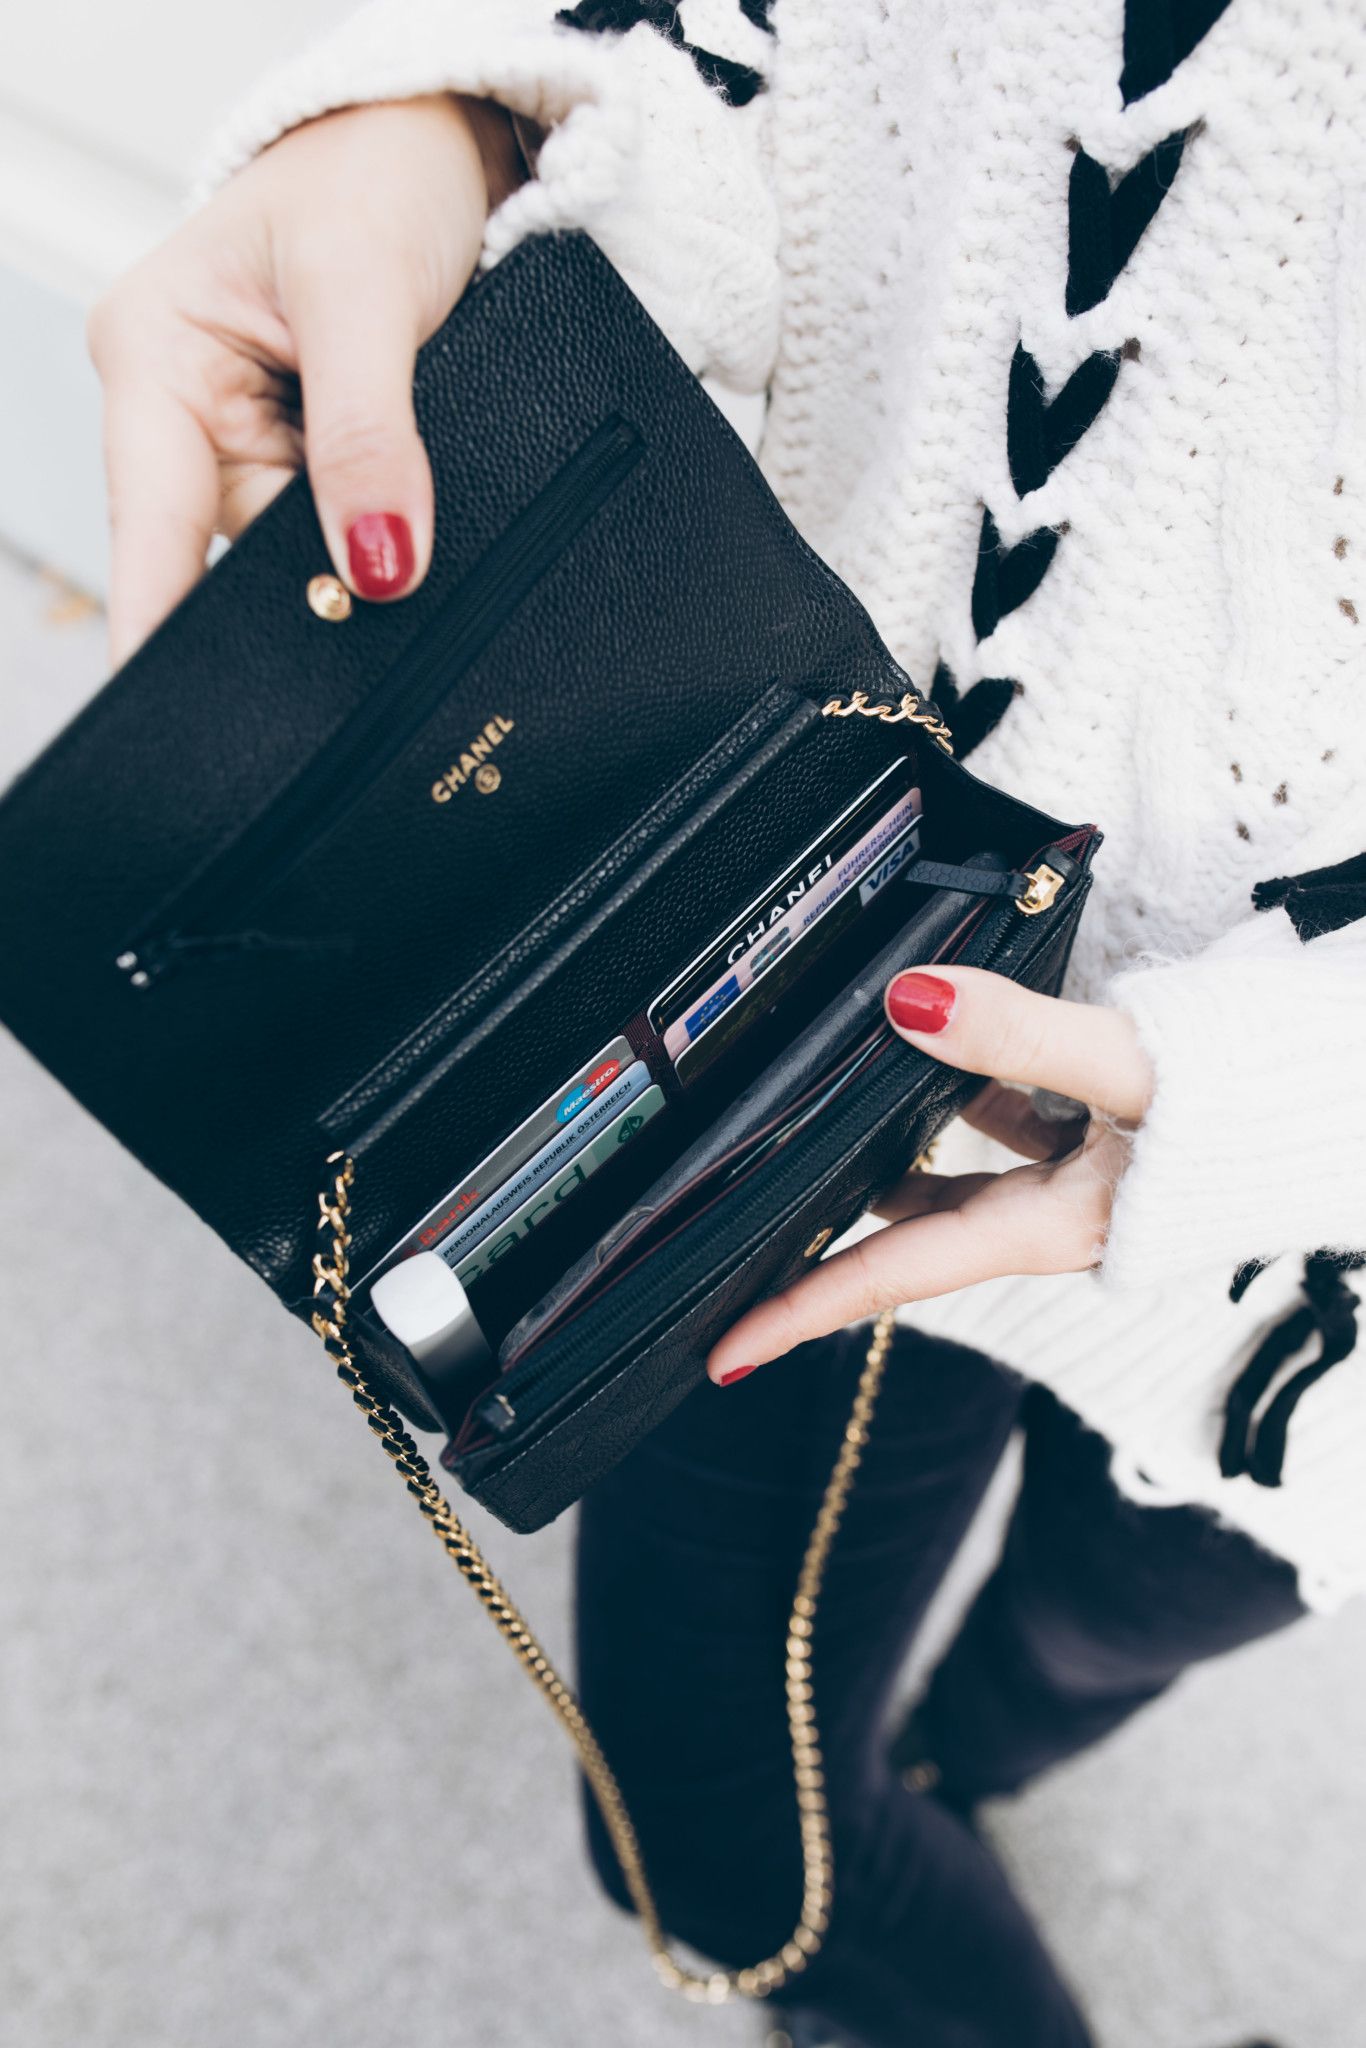 Designer Wallets: Luxurious and Stylish Accessories for Every Occasion